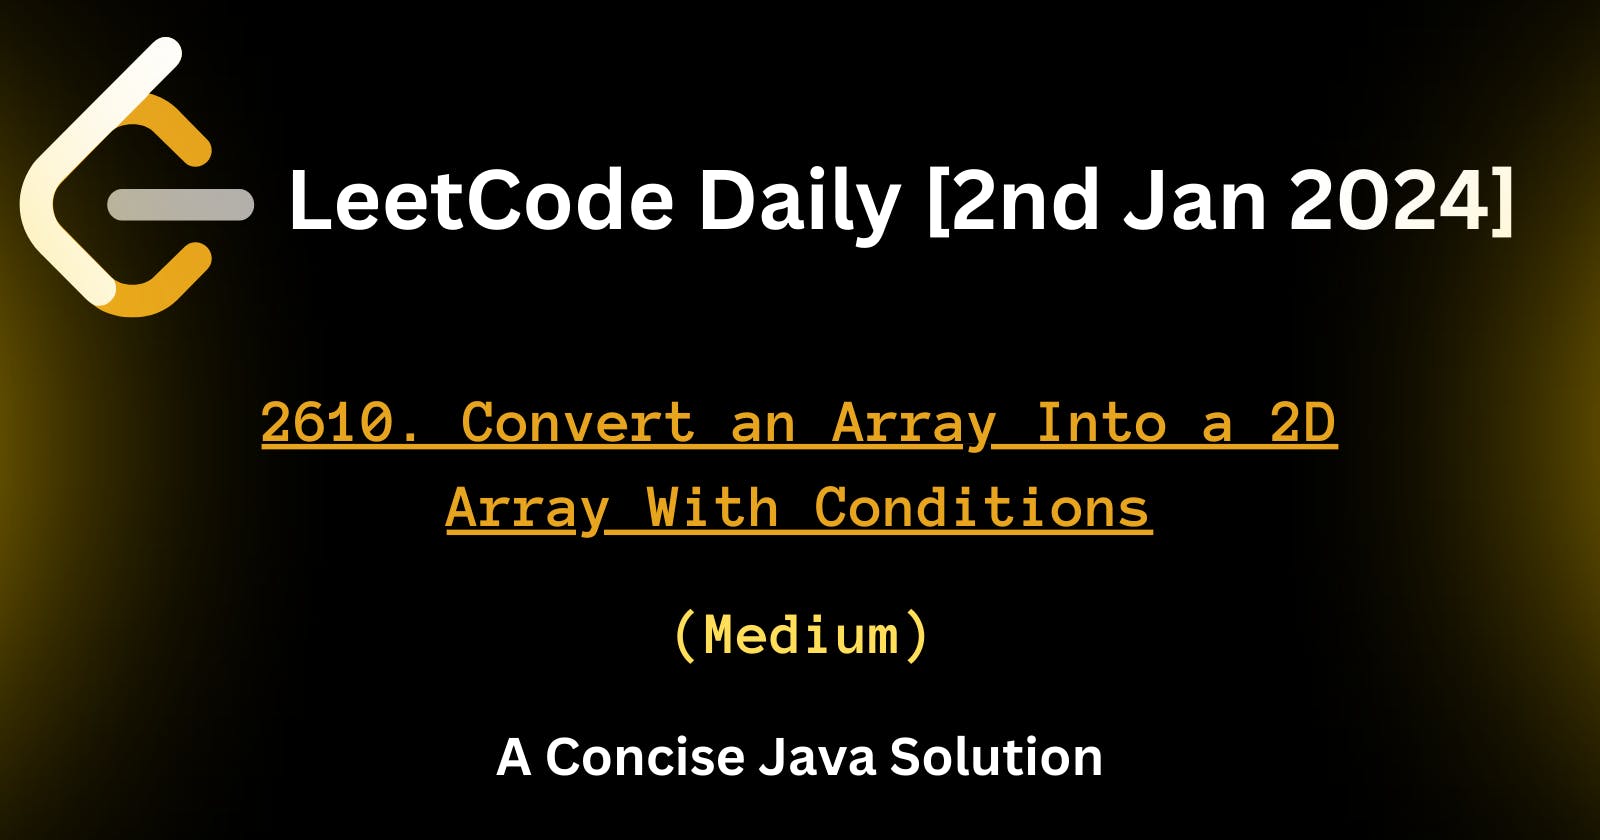 LeetCode Daily (2nd Jan 2024) 
Convert an Array Into a 2D Array With Conditions